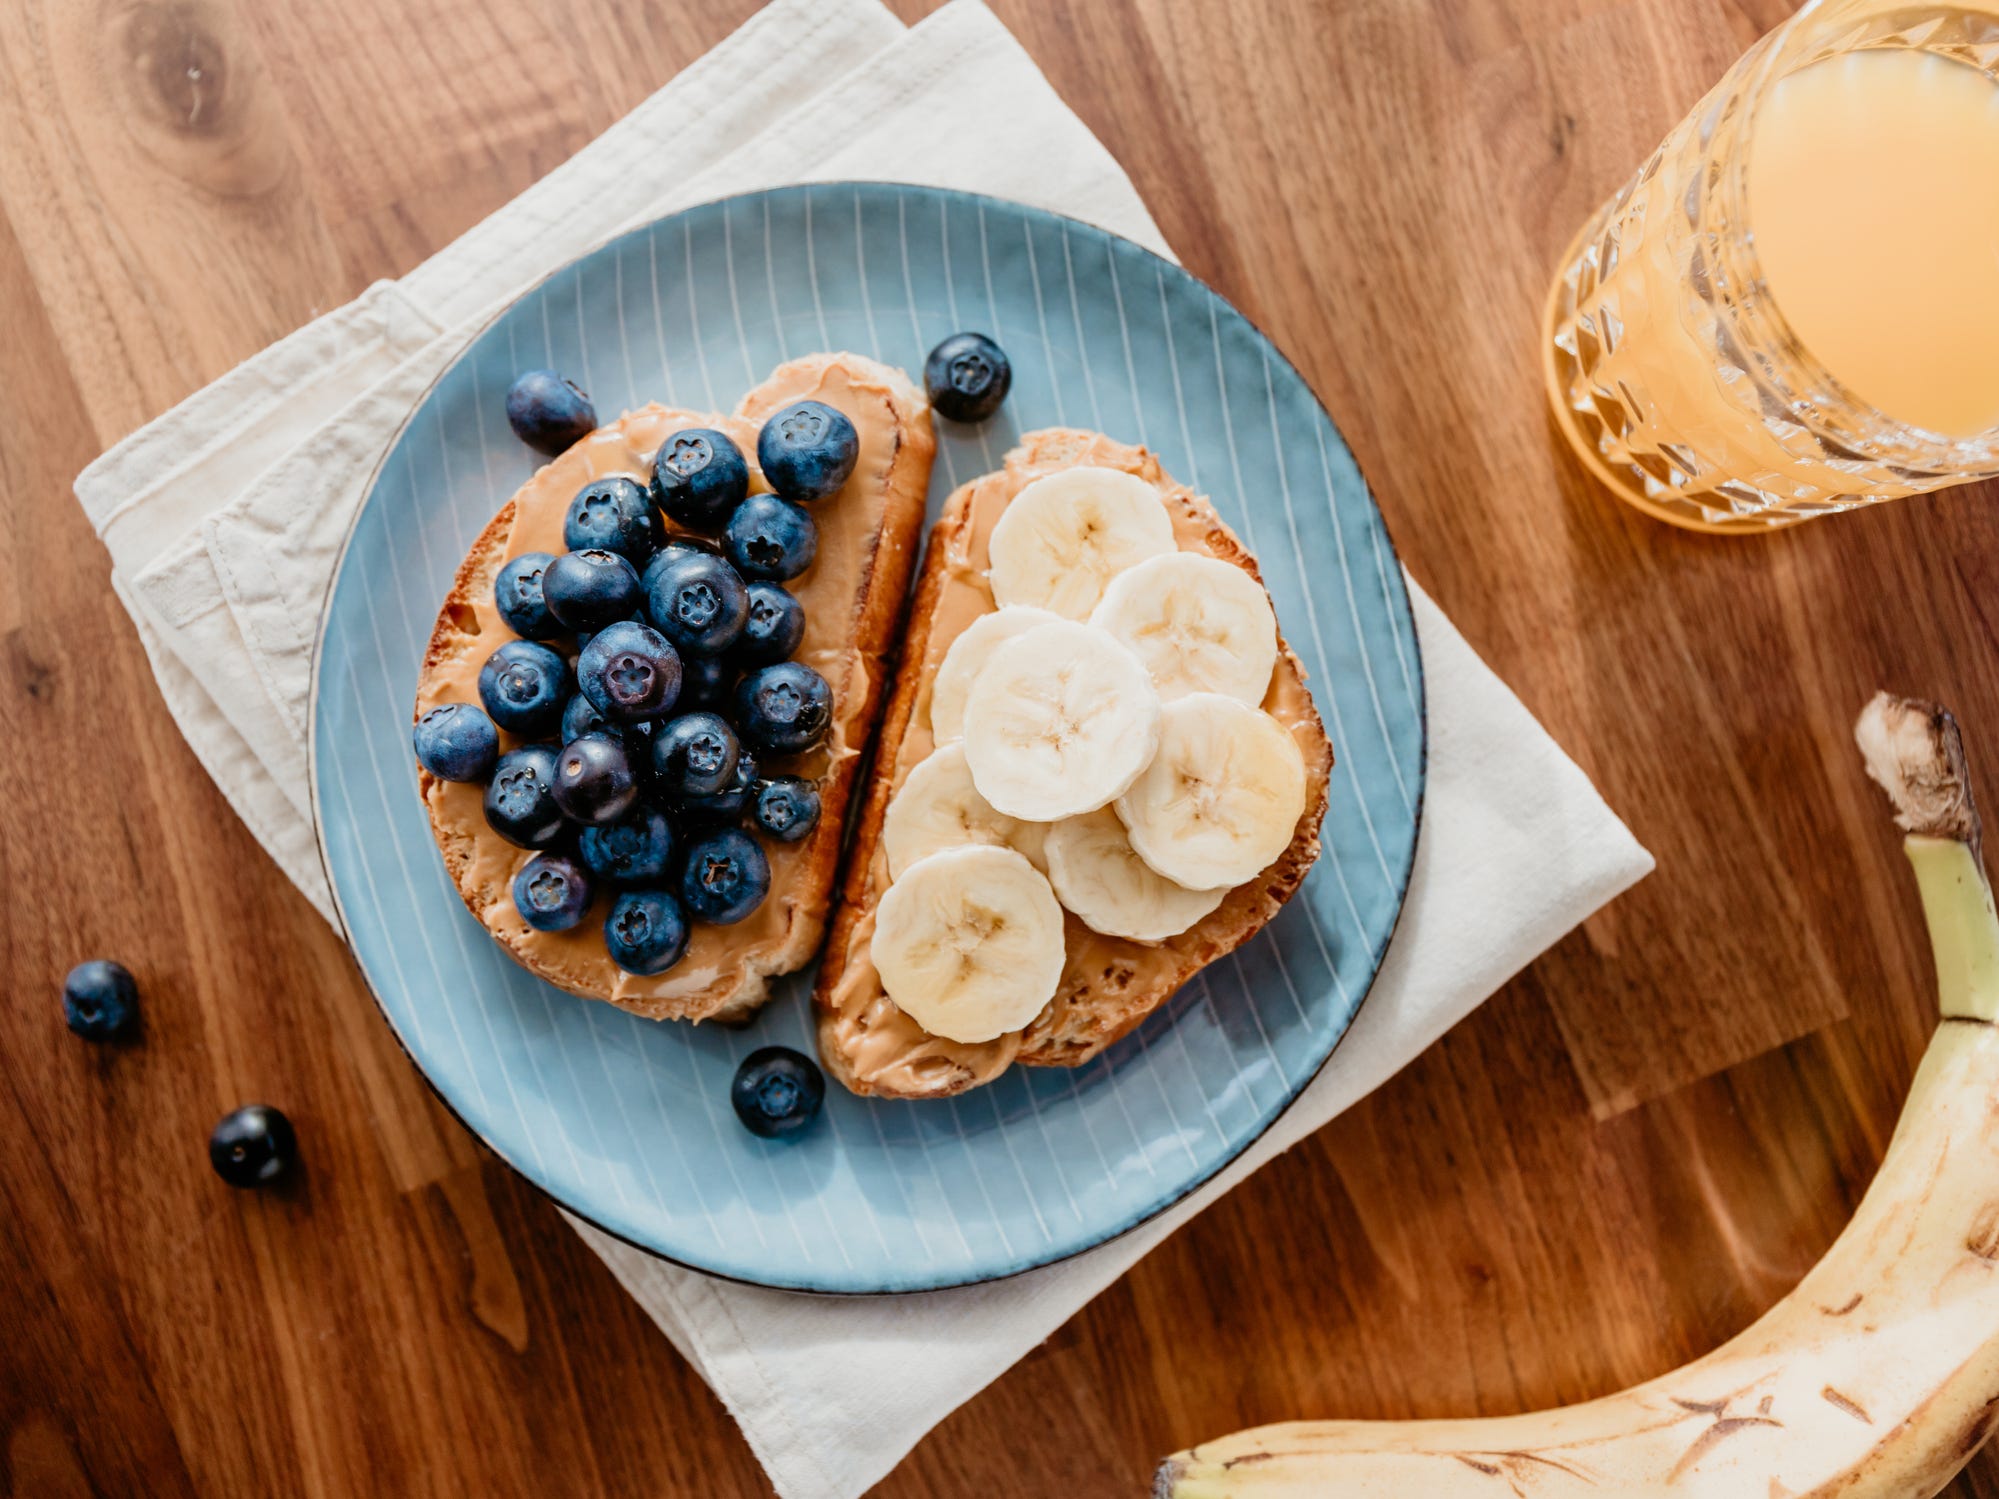 Peanut butter and fruit on toast is a quick breakfast.